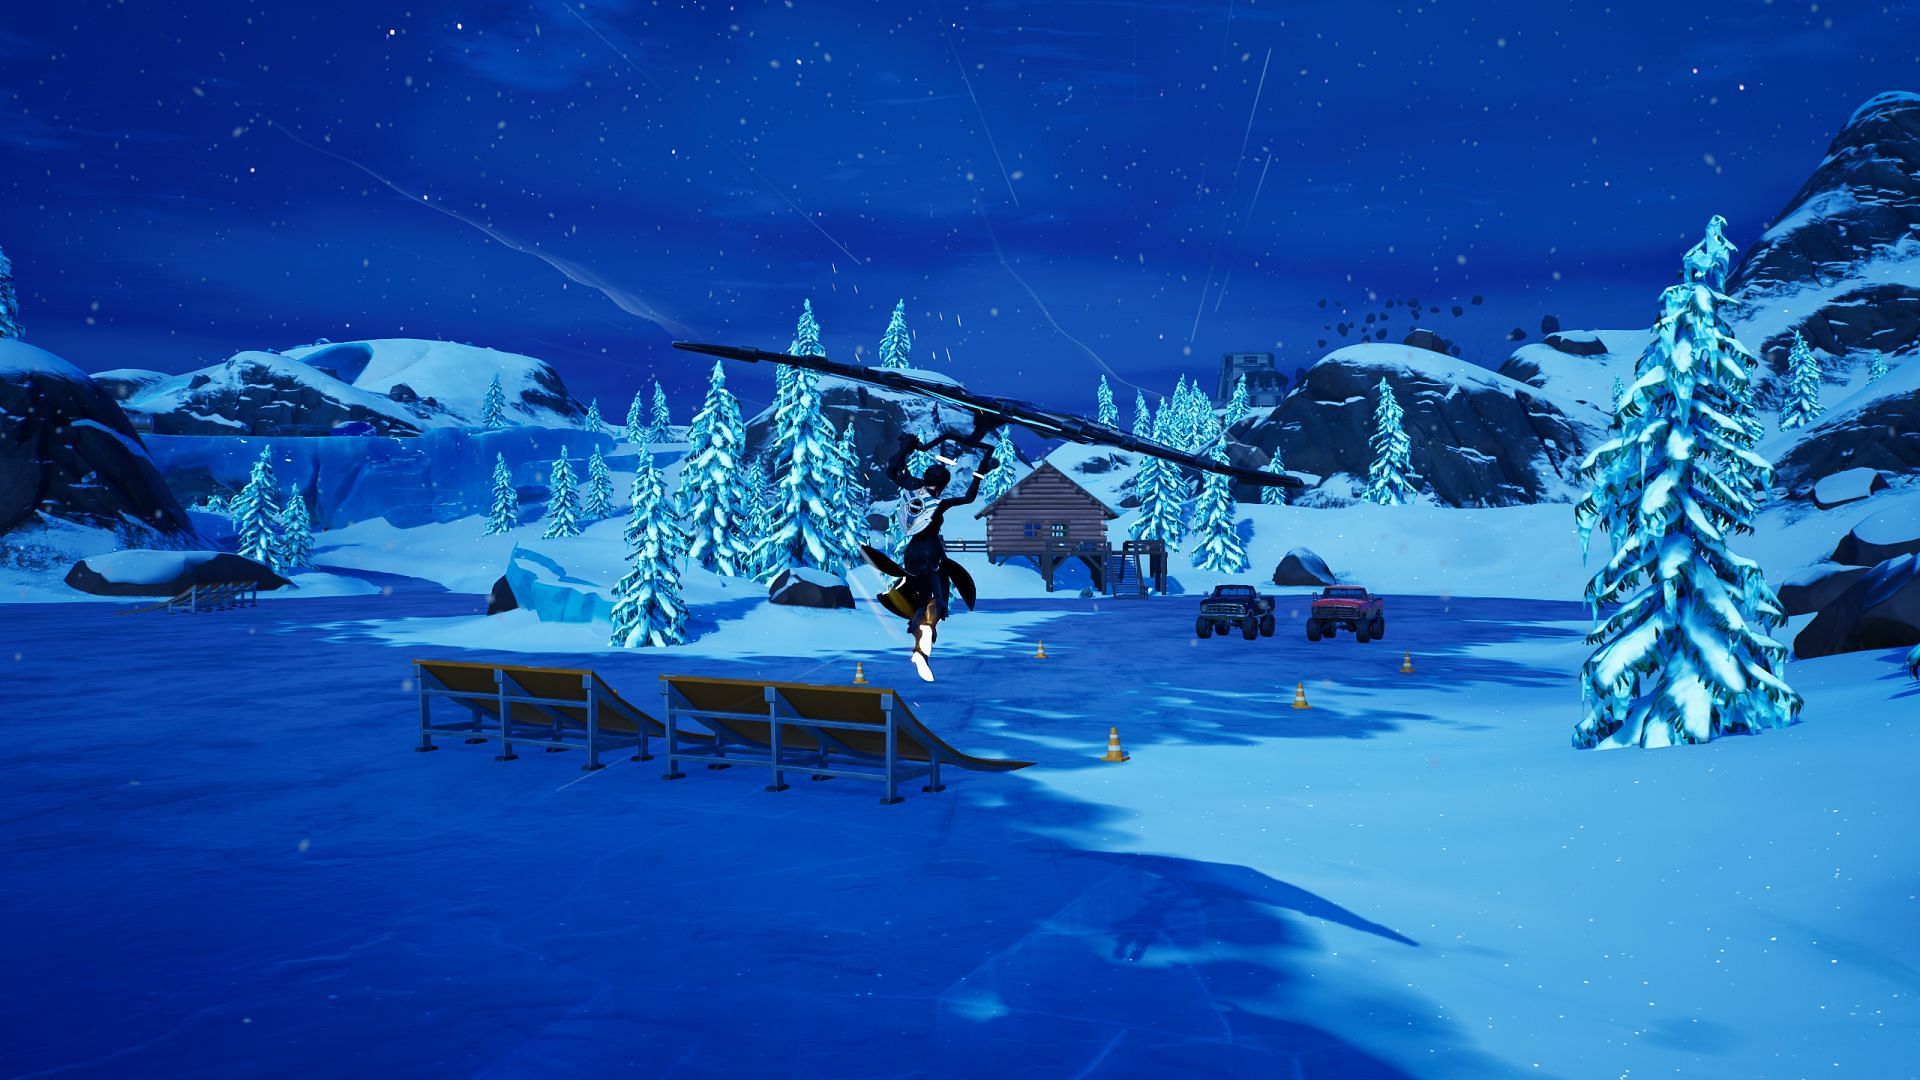 Two vehicles always spawn at Icy Islets (Image via Epic Games/Fortnite)